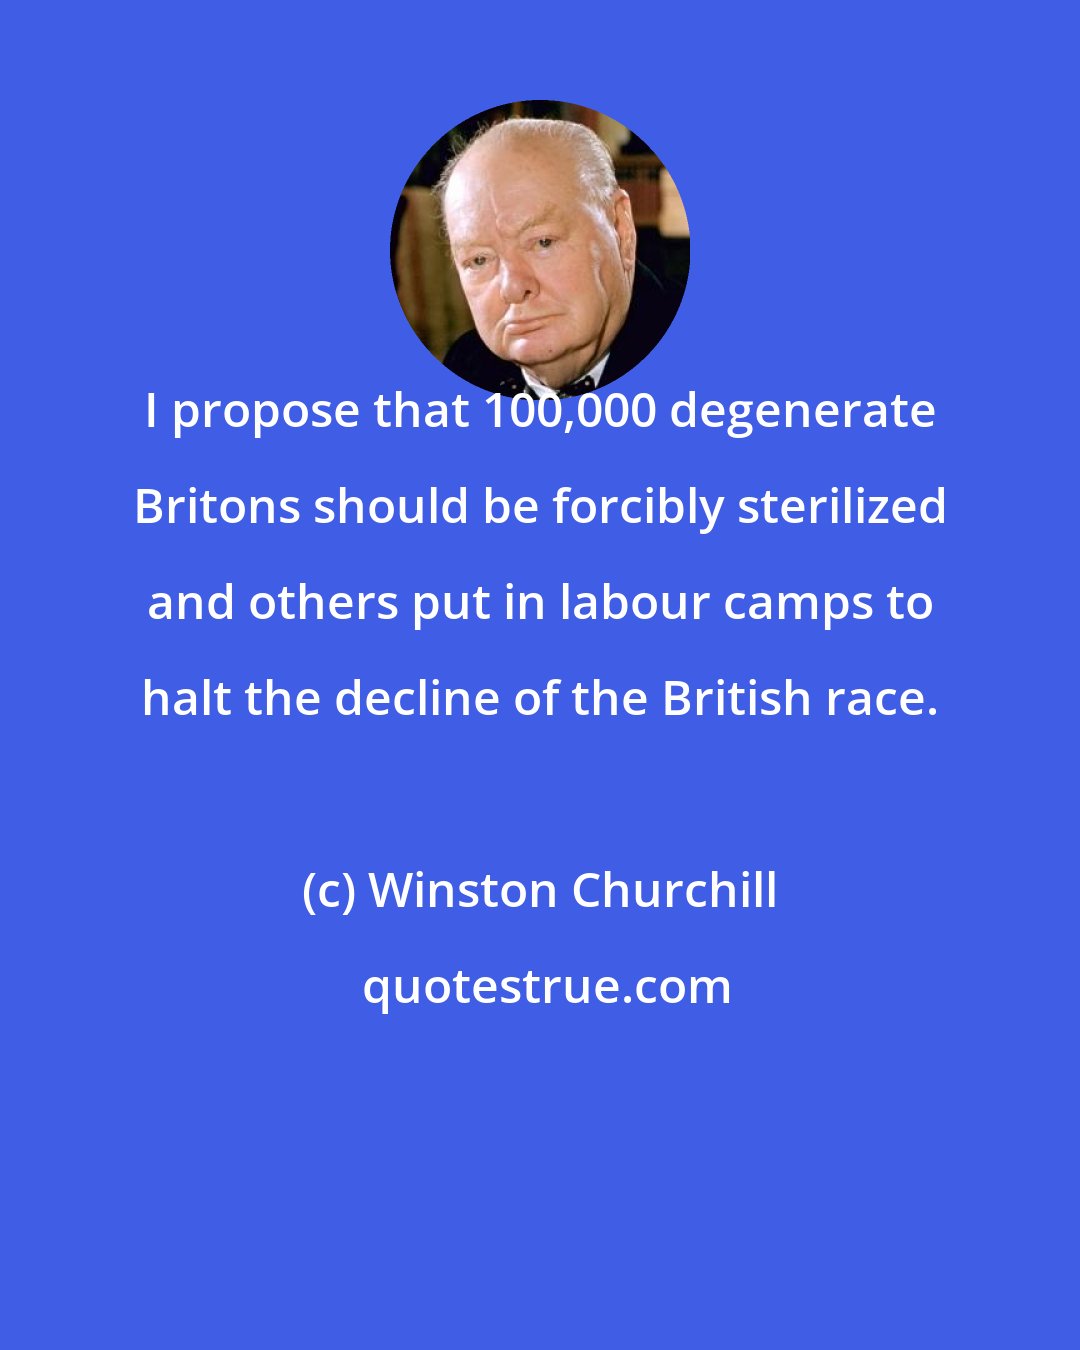 Winston Churchill: I propose that 100,000 degenerate Britons should be forcibly sterilized and others put in labour camps to halt the decline of the British race.